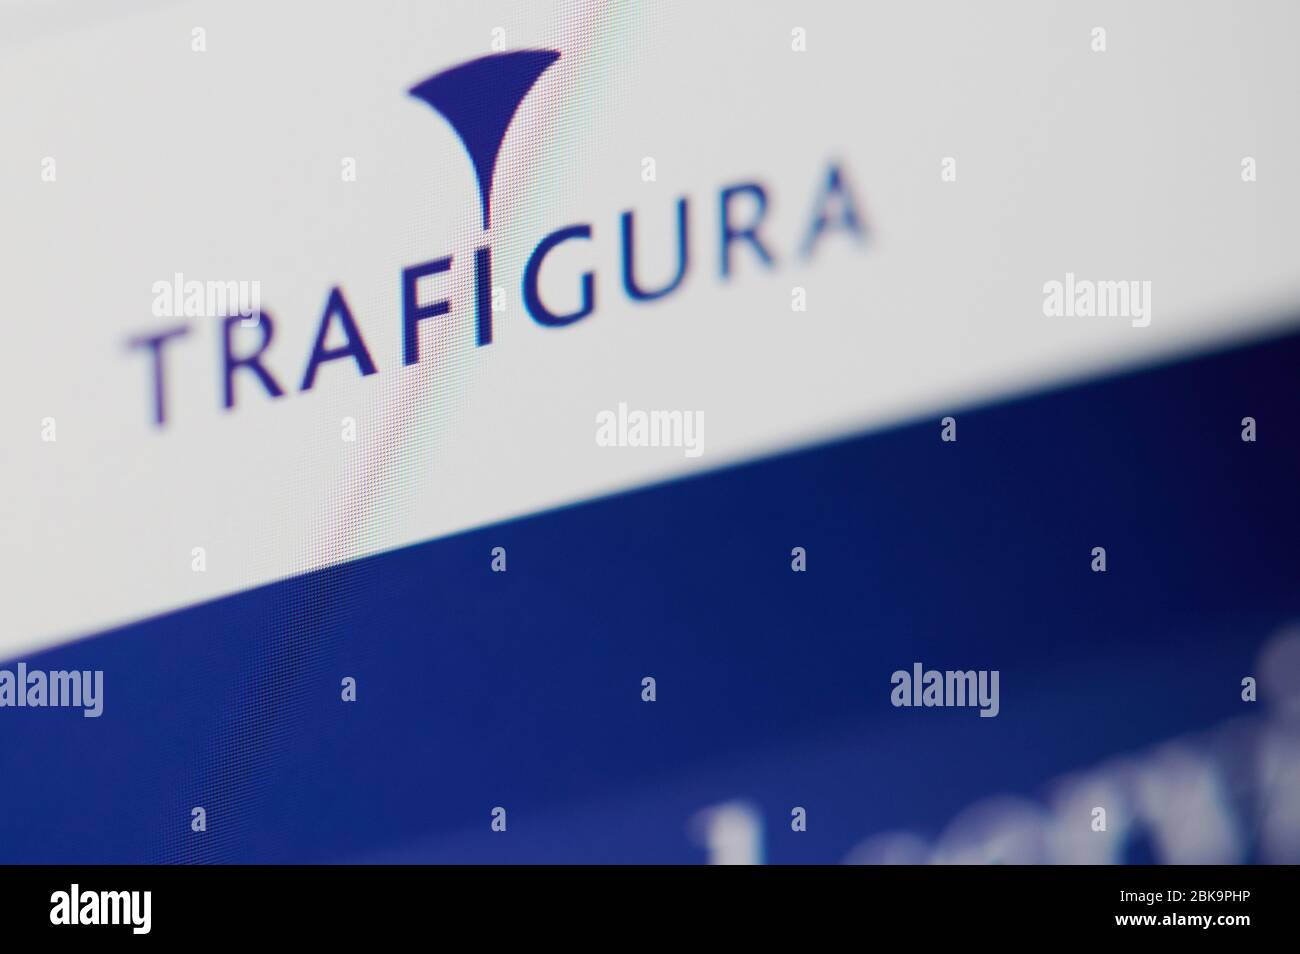 New-York , USA - April 29 , 2020:Trafigura home web page close up view on laptop screen Stock Photo